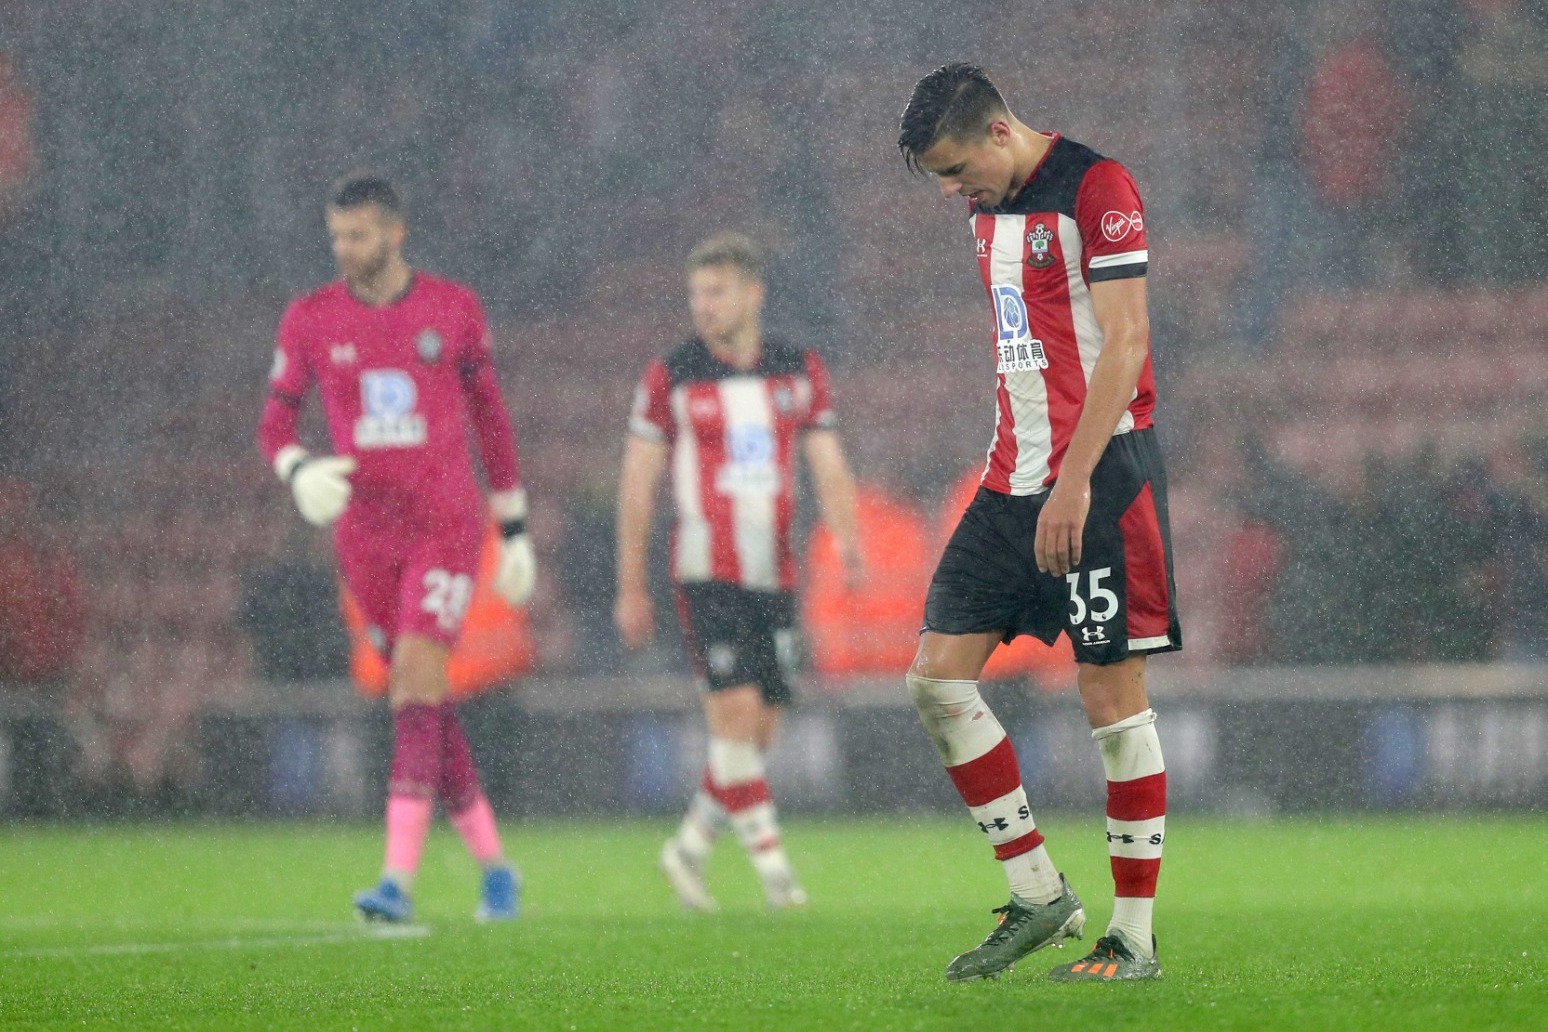 LEICESTER MATCH PREMIER LEAGUE RECORD IN ROUT OF SOUTHAMPTON 